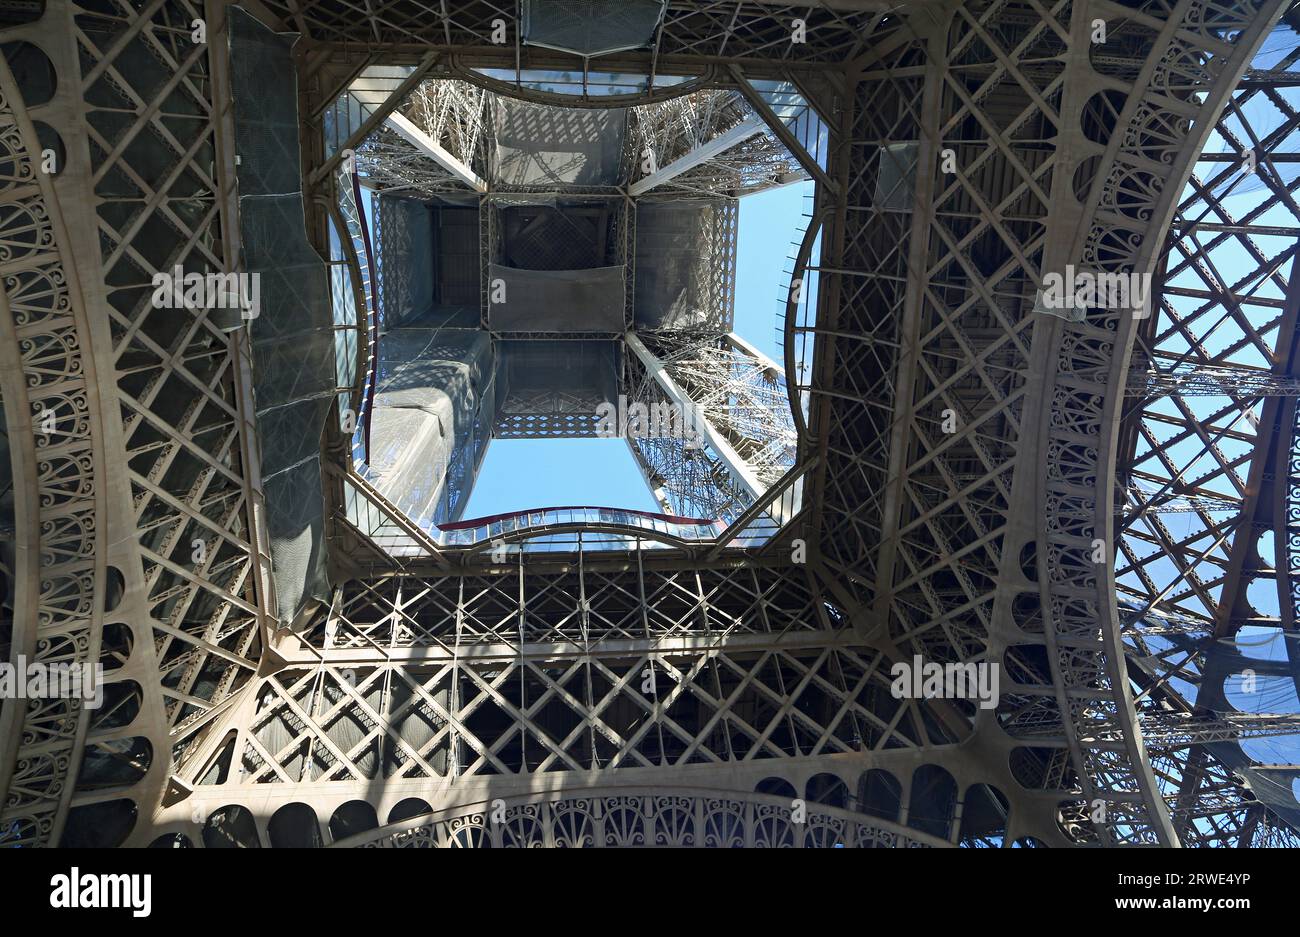 In the middle of Eiffel Tower - Paris, France Stock Photo